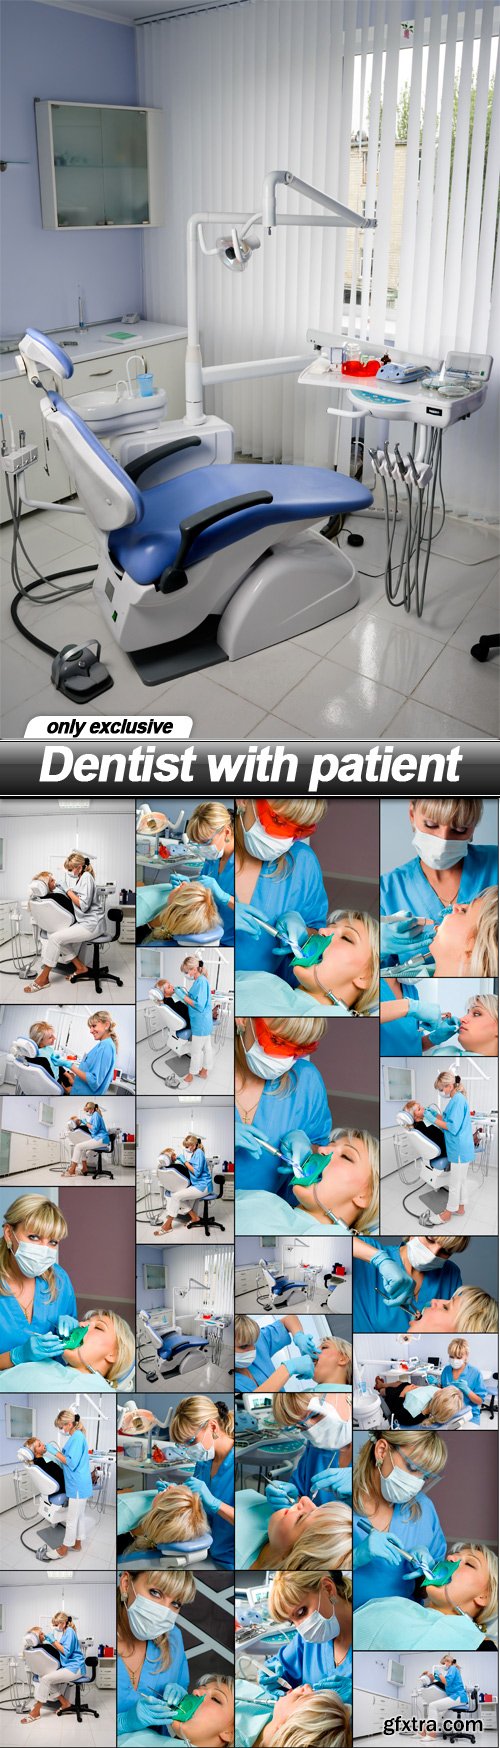 Dentist with patient - 25 UHQ JPEG